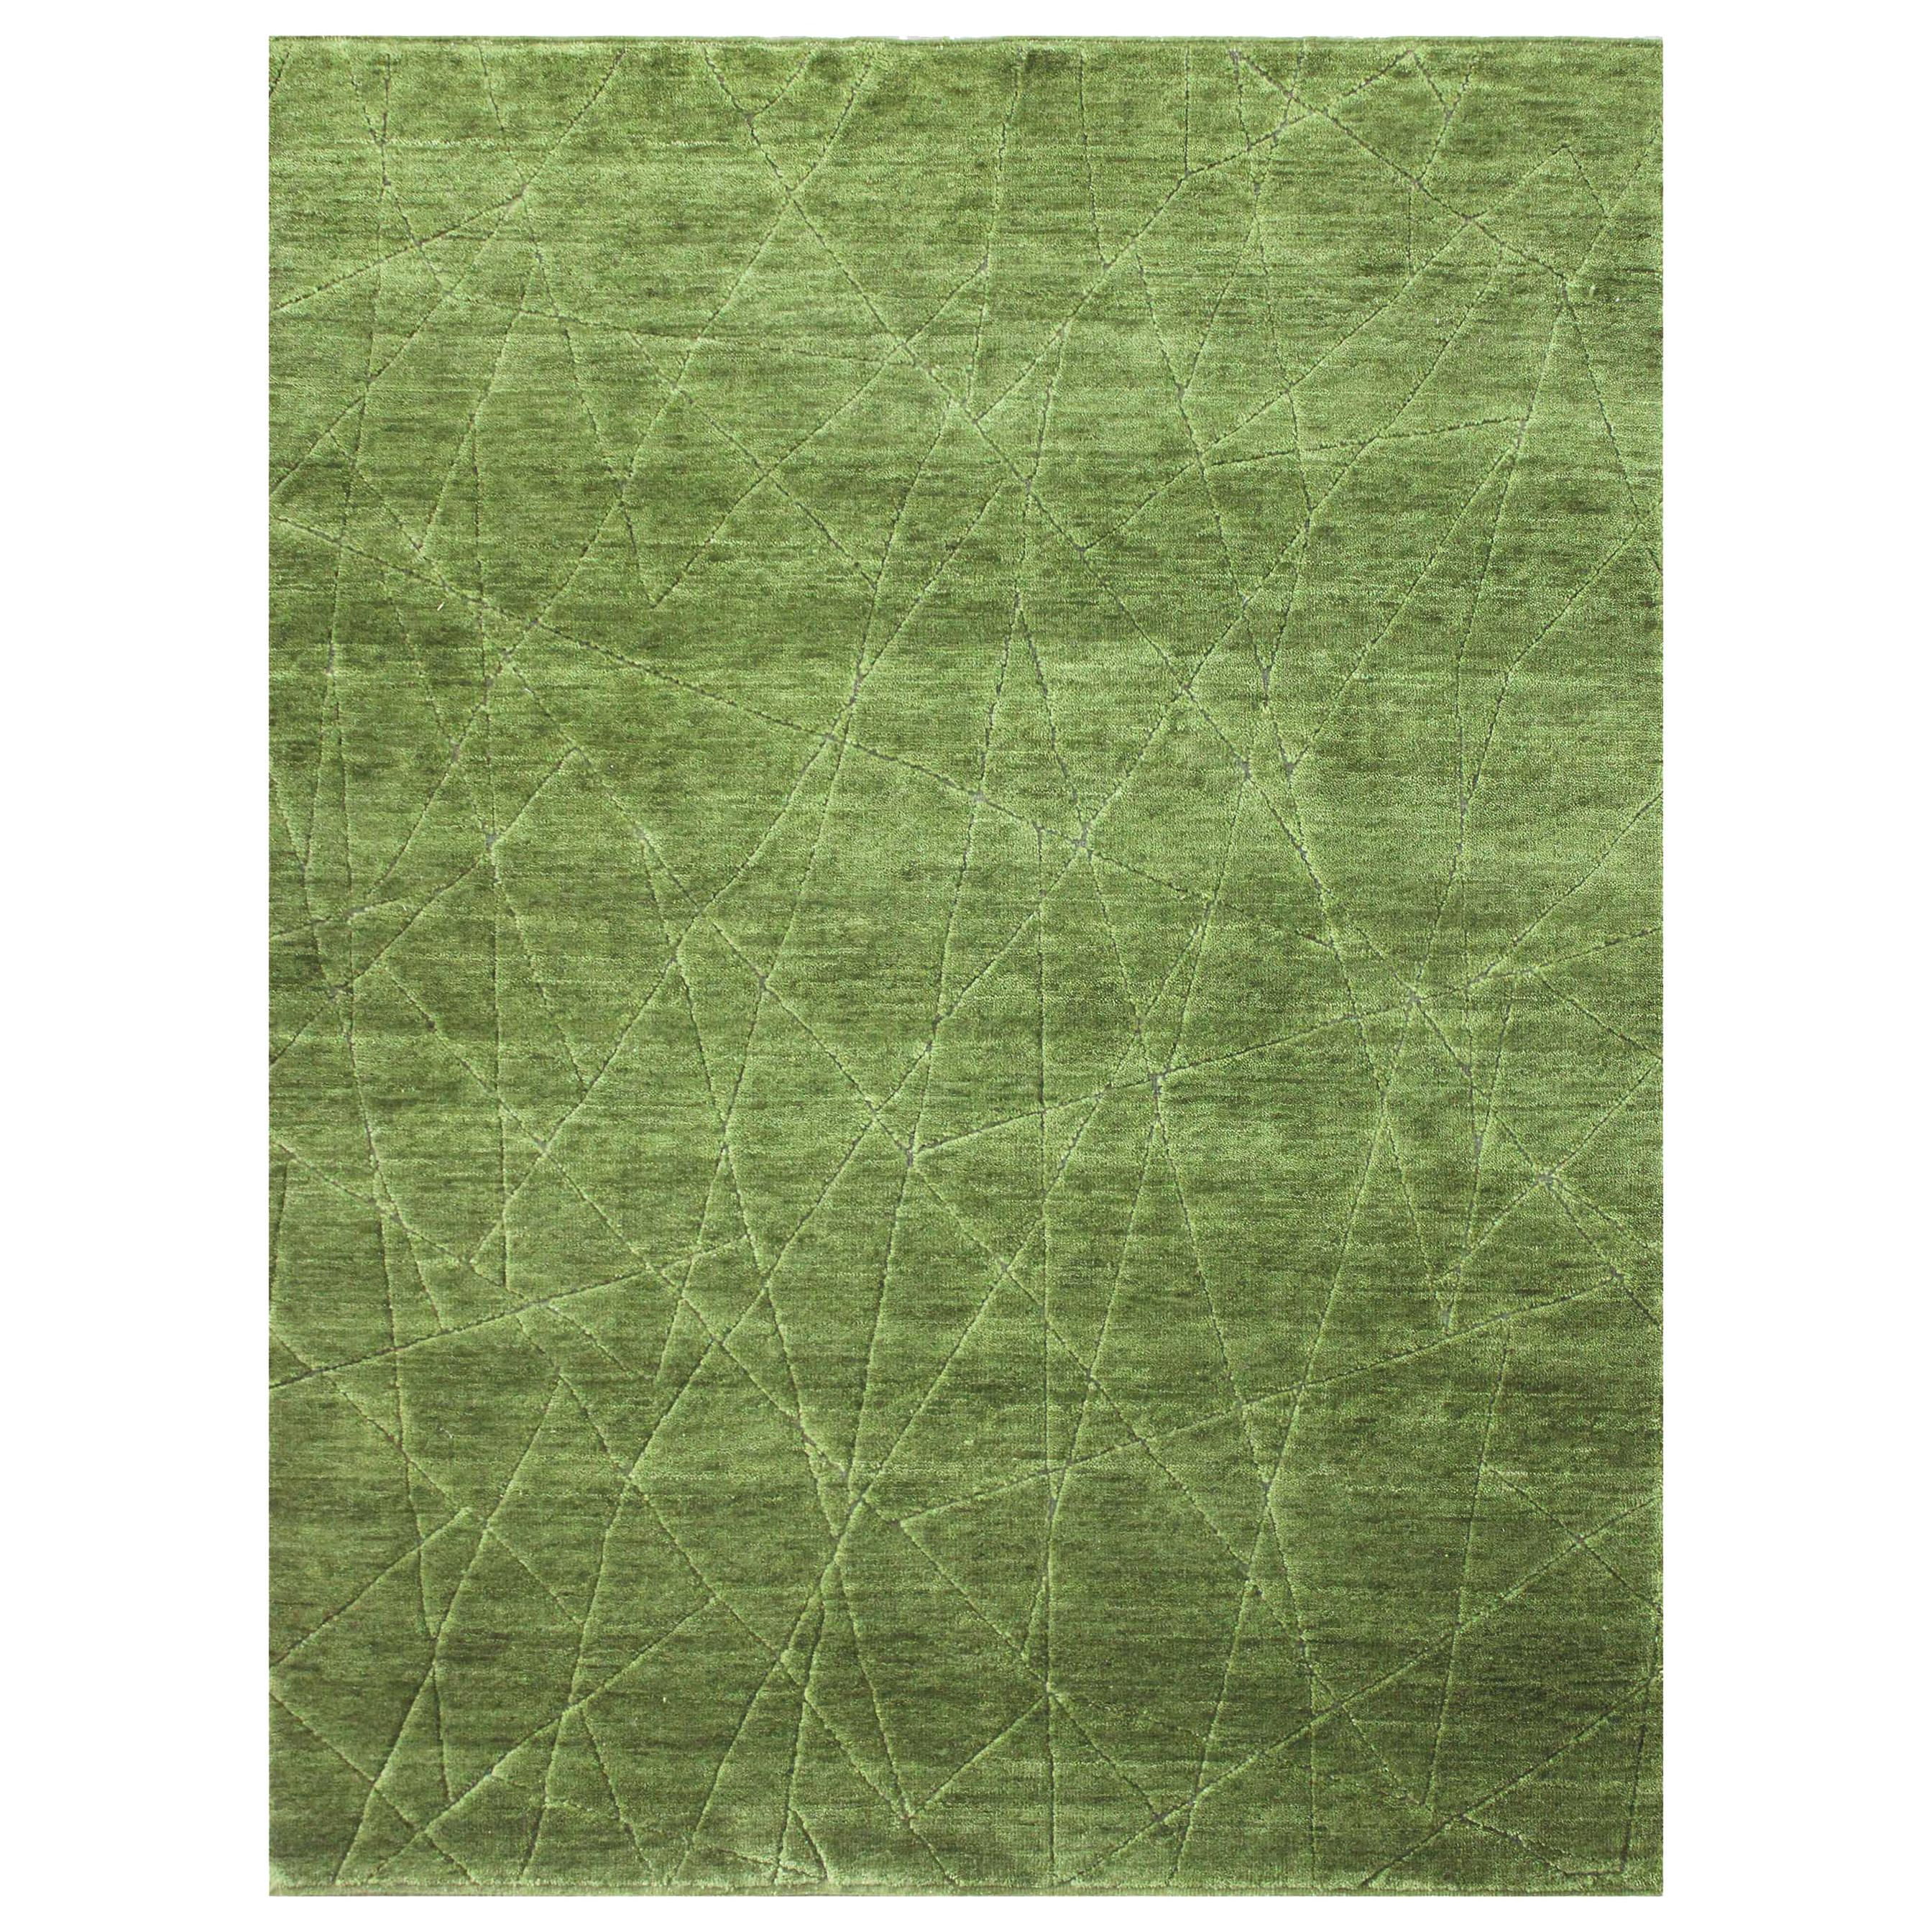 New Cameron Collection Area Rug with Modern Design Patterns and Colors For Sale